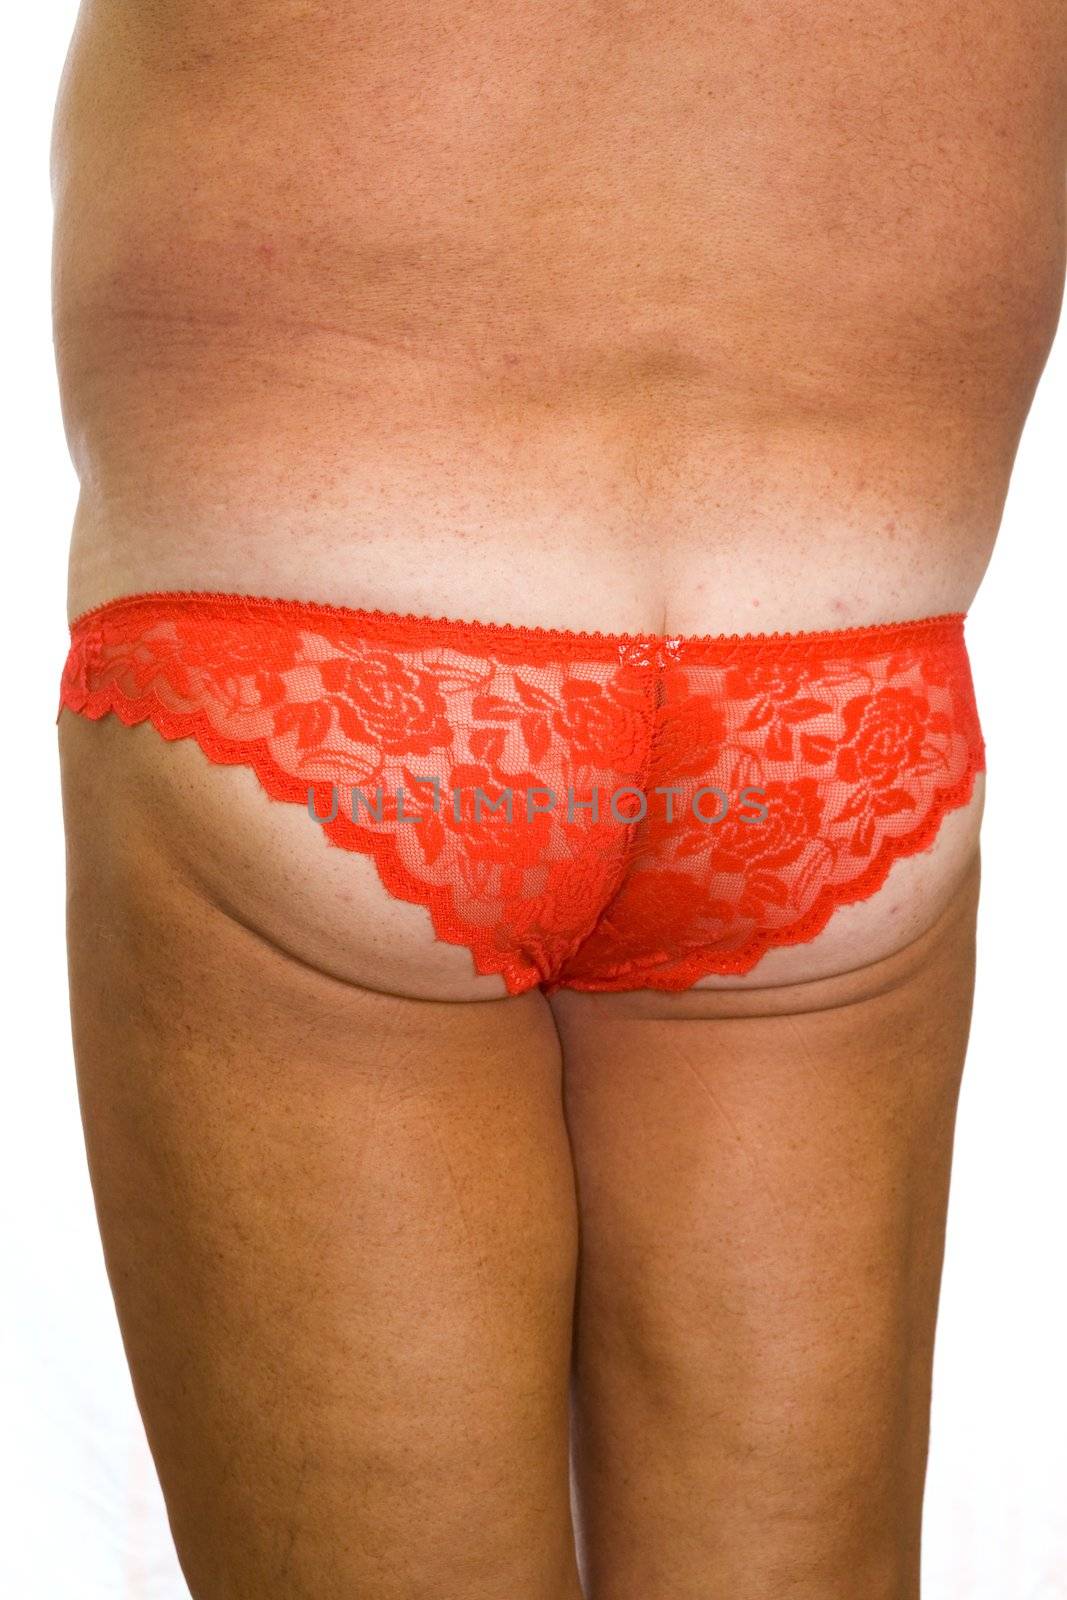 Male ass in red fishnet women's panties on a white background